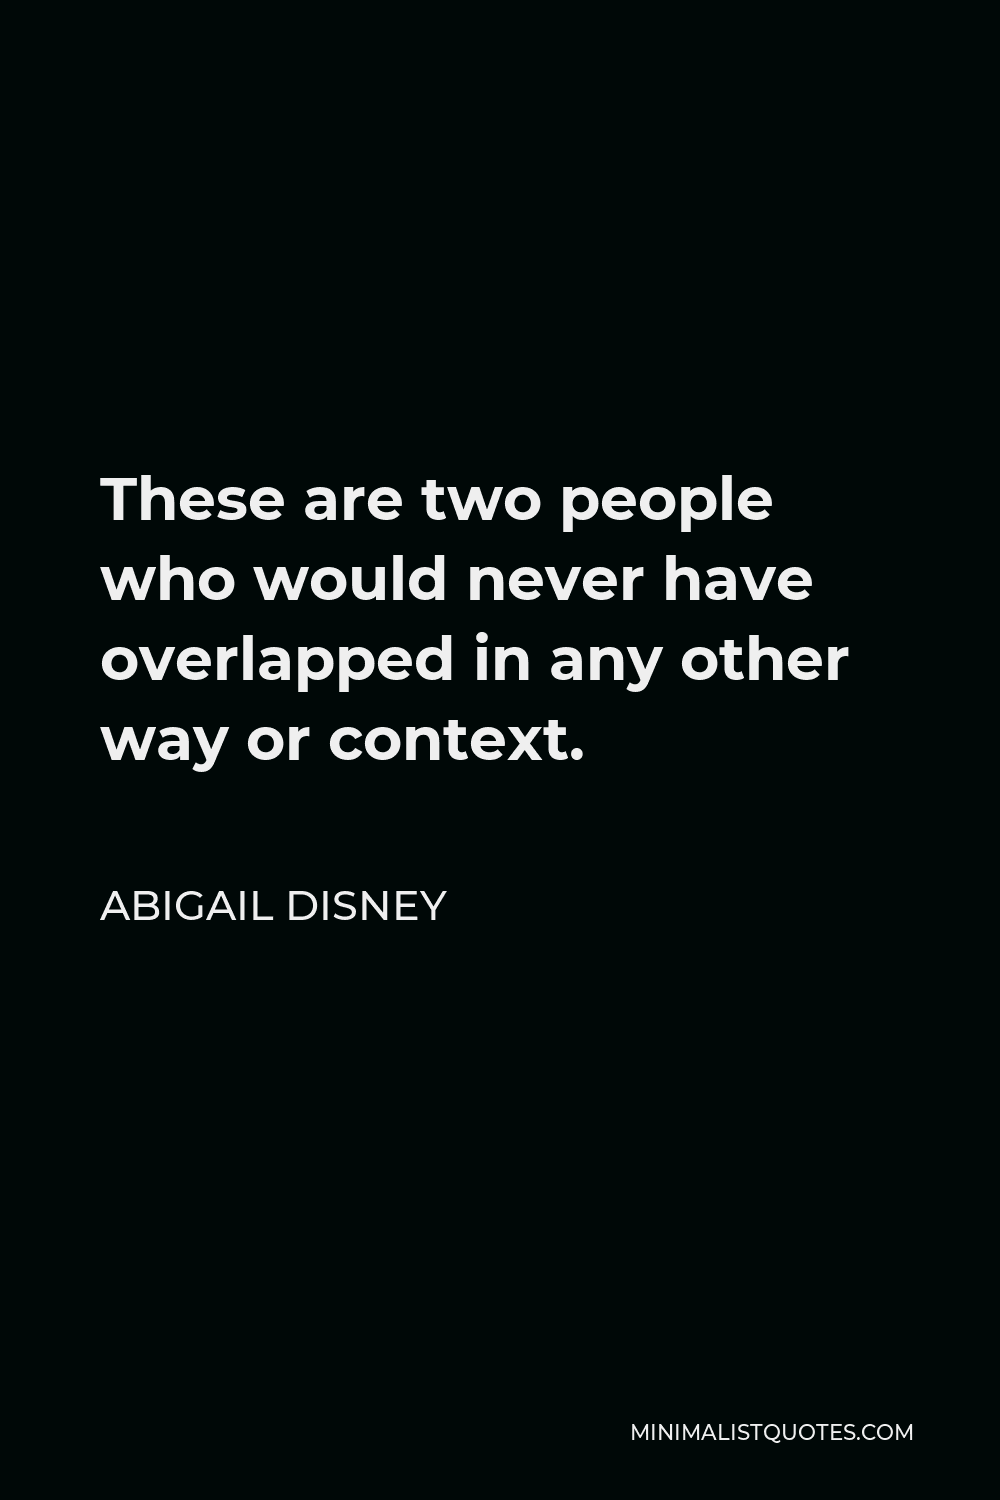 Abigail Disney Quote - These are two people who would never have overlapped in any other way or context.